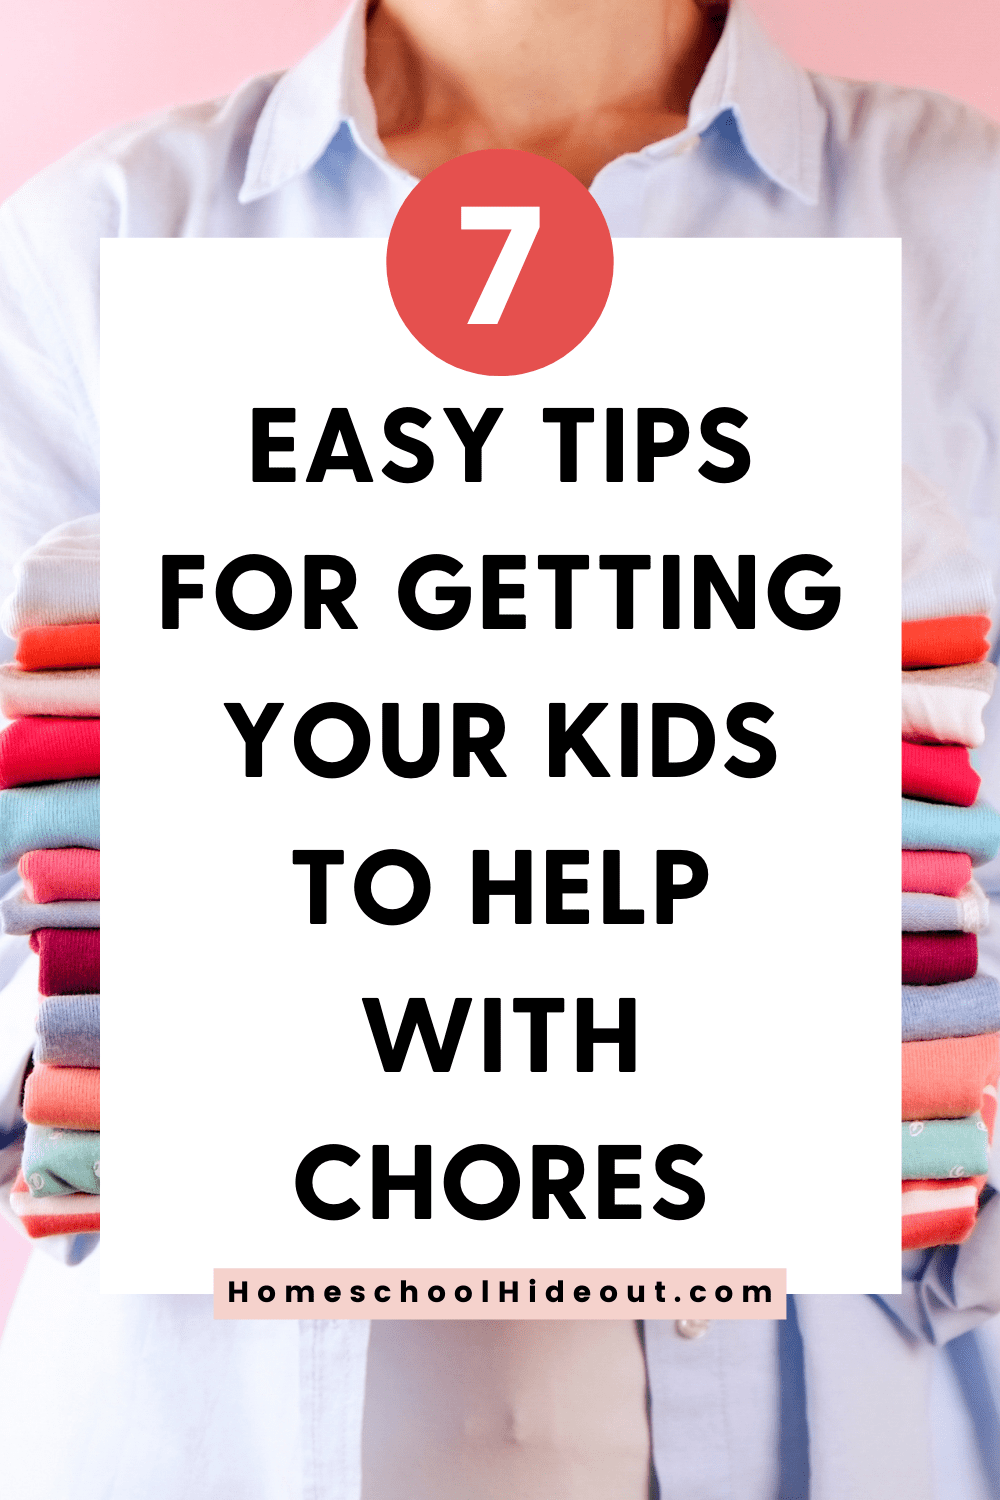 It's easy to get kids to help with chores! You just need to know these tricks. #4 helped me the most!